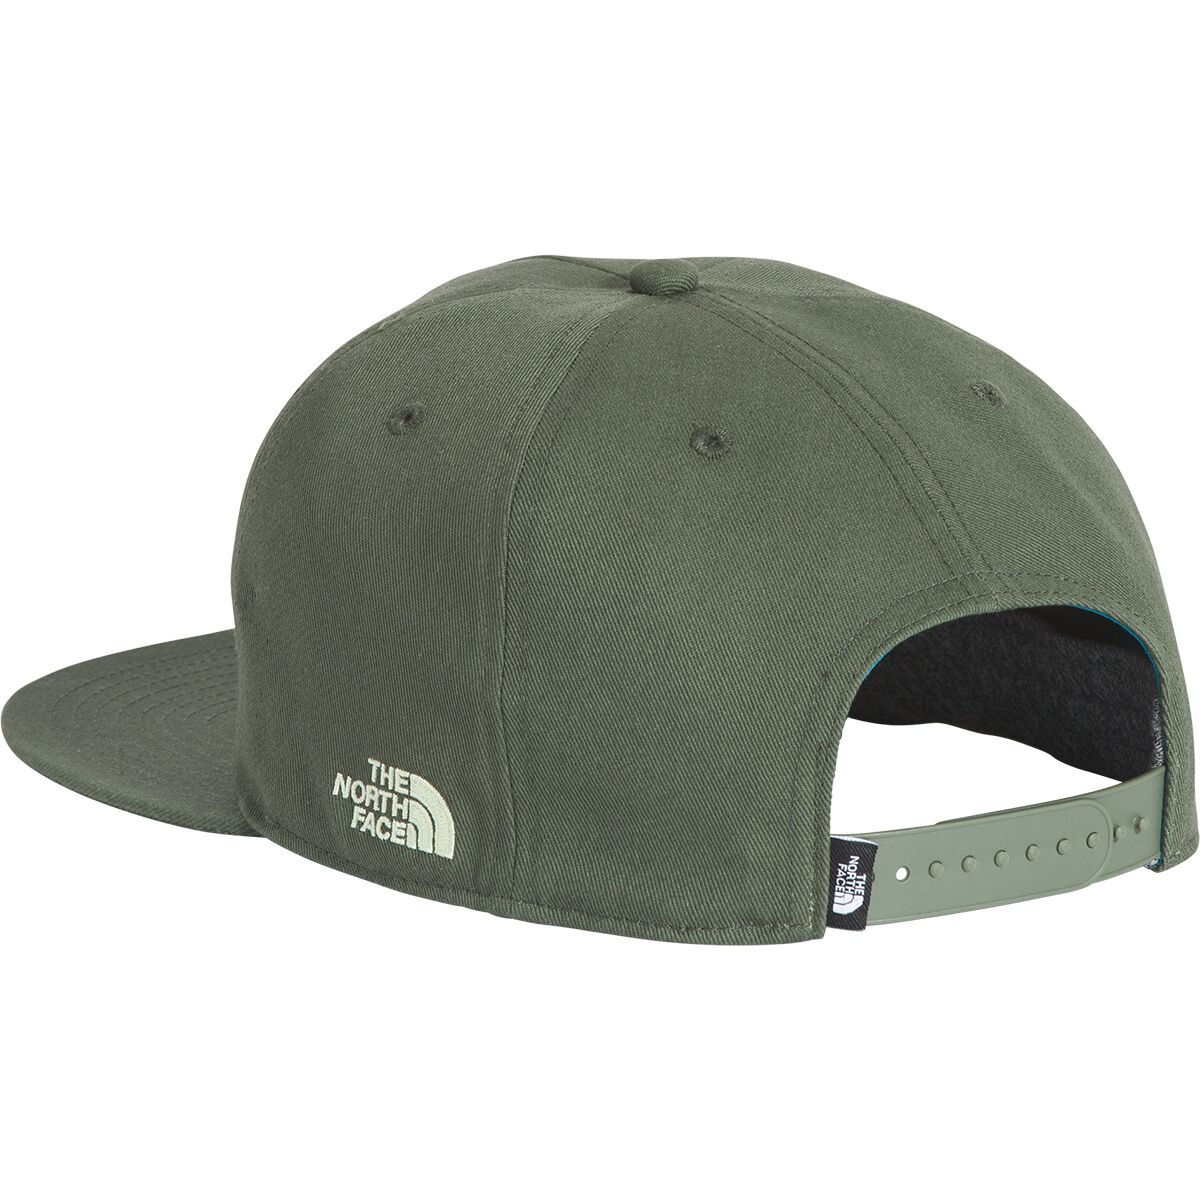 The North Face Embroidered Earthscape Ball Cap - Accessories